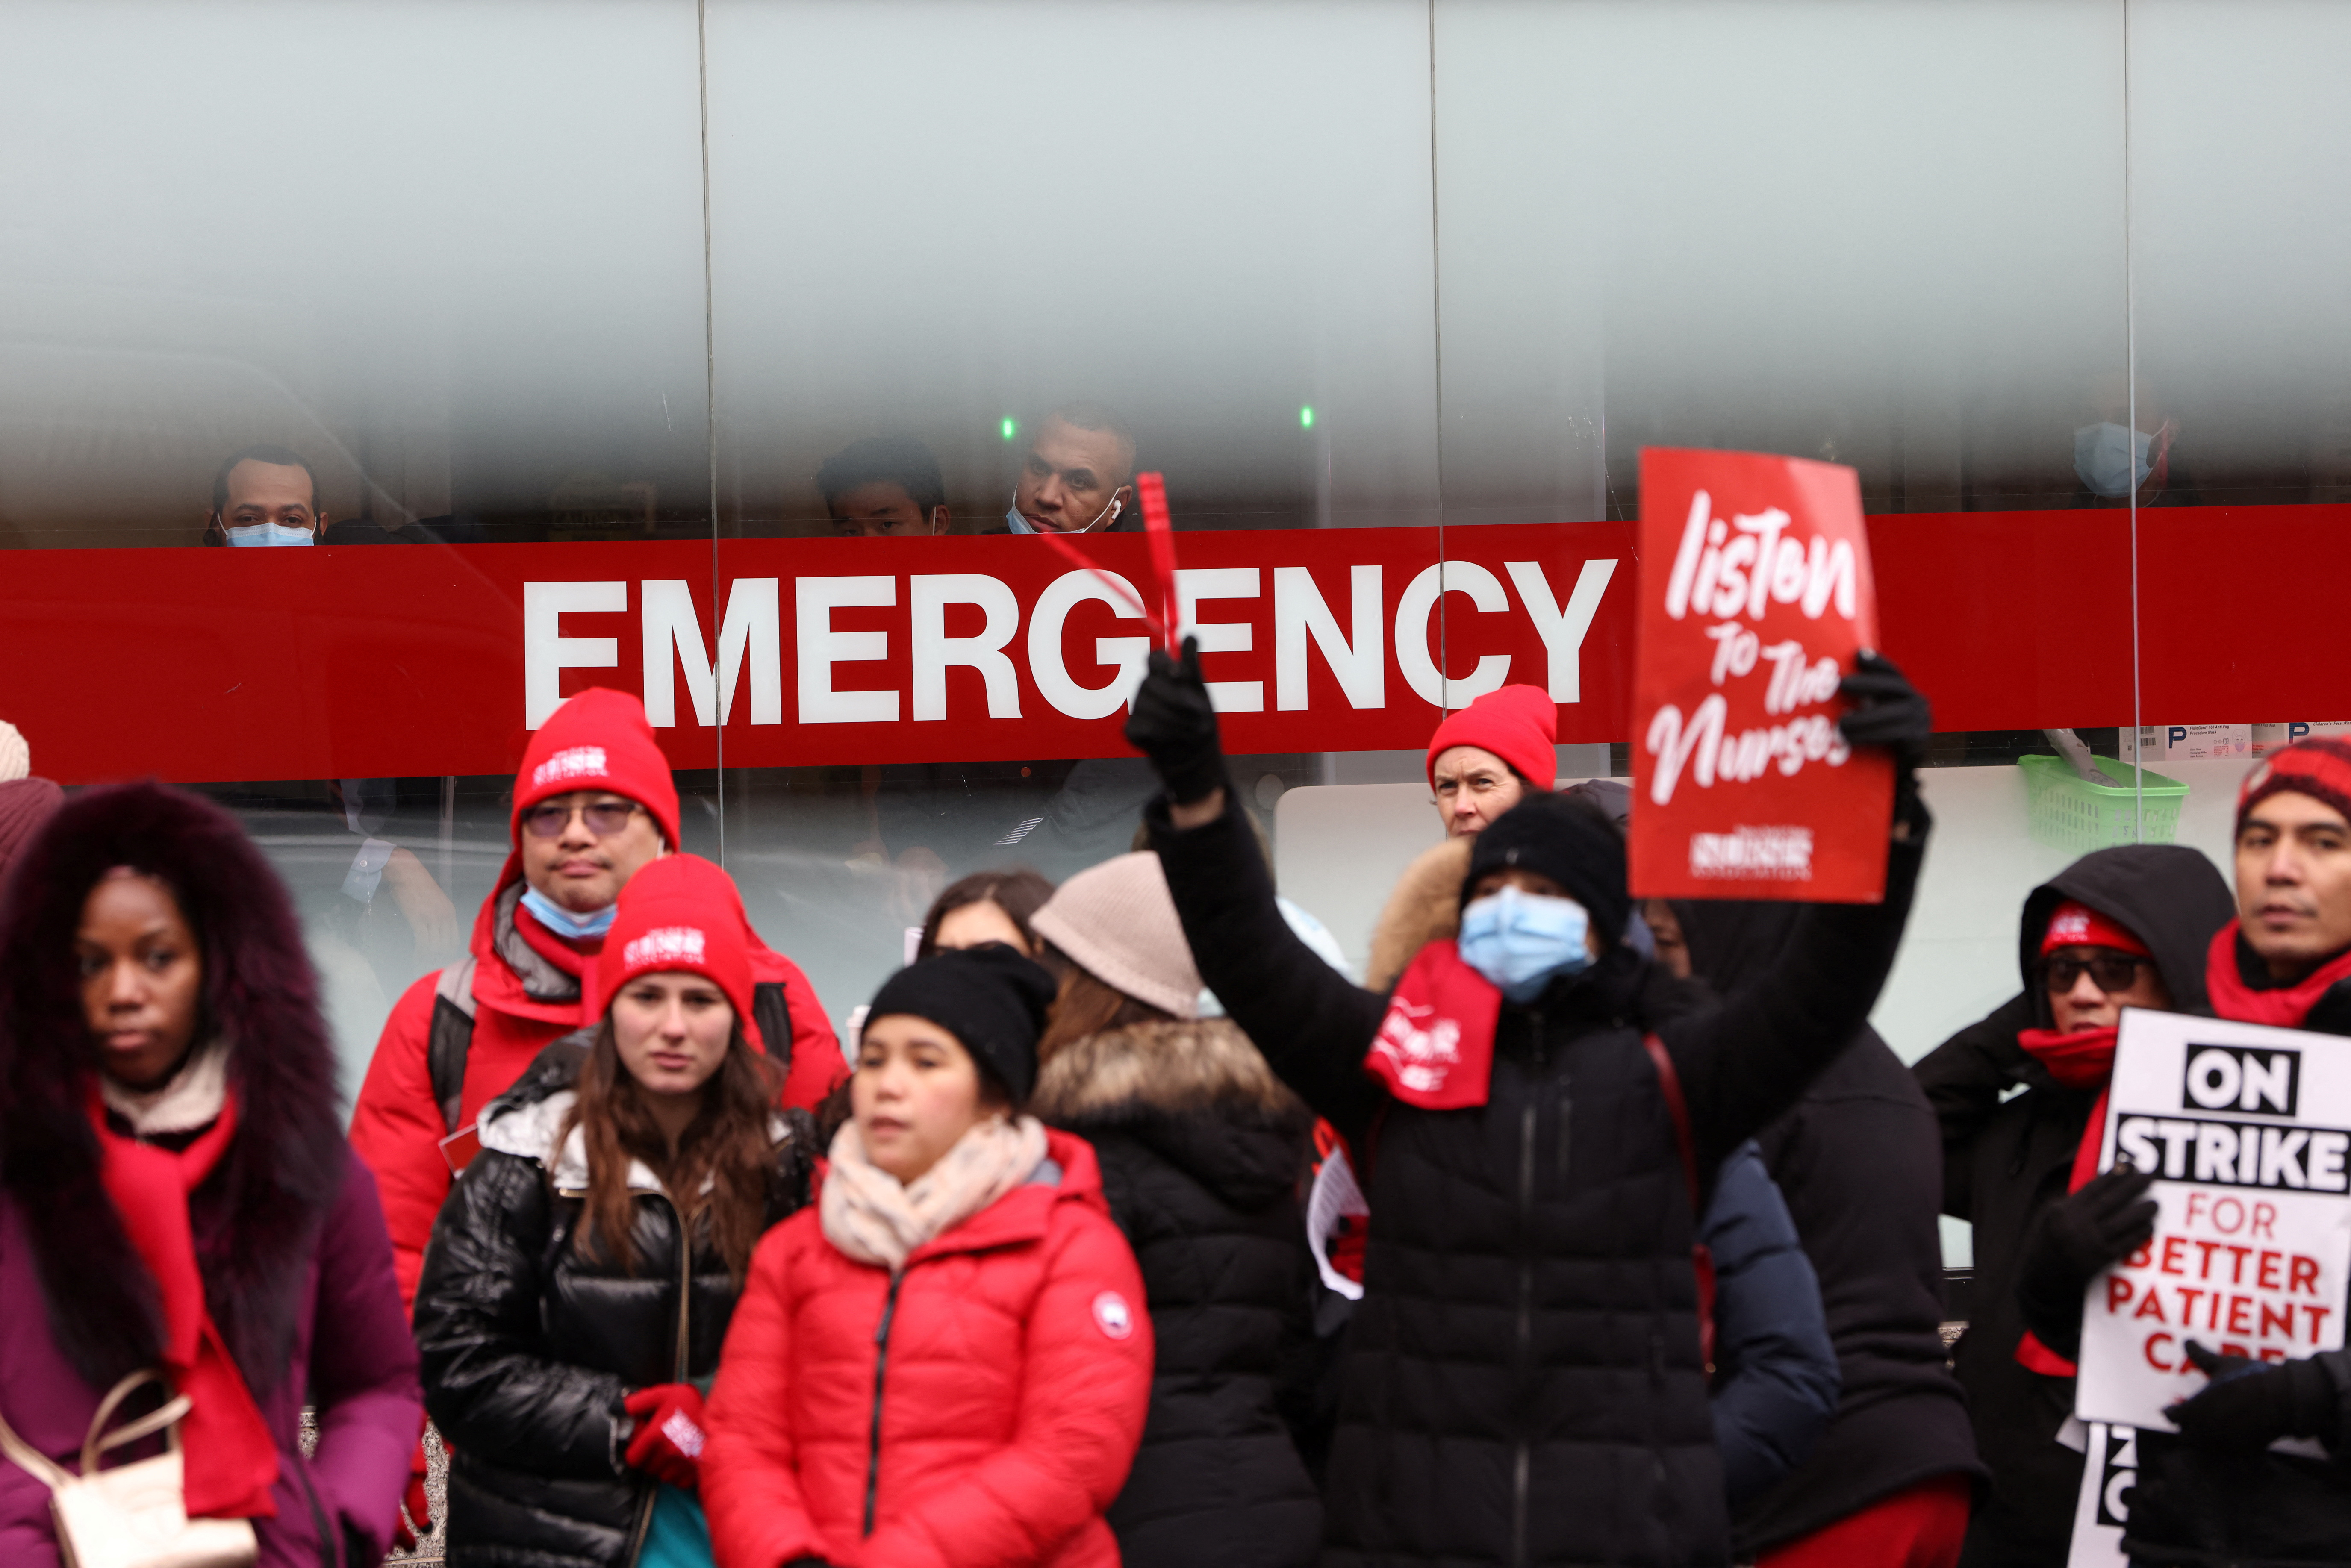 Health workers in front of the Mount Sinai hospital in Manhattan, on strike (REUTERS / Andrew Kelly)